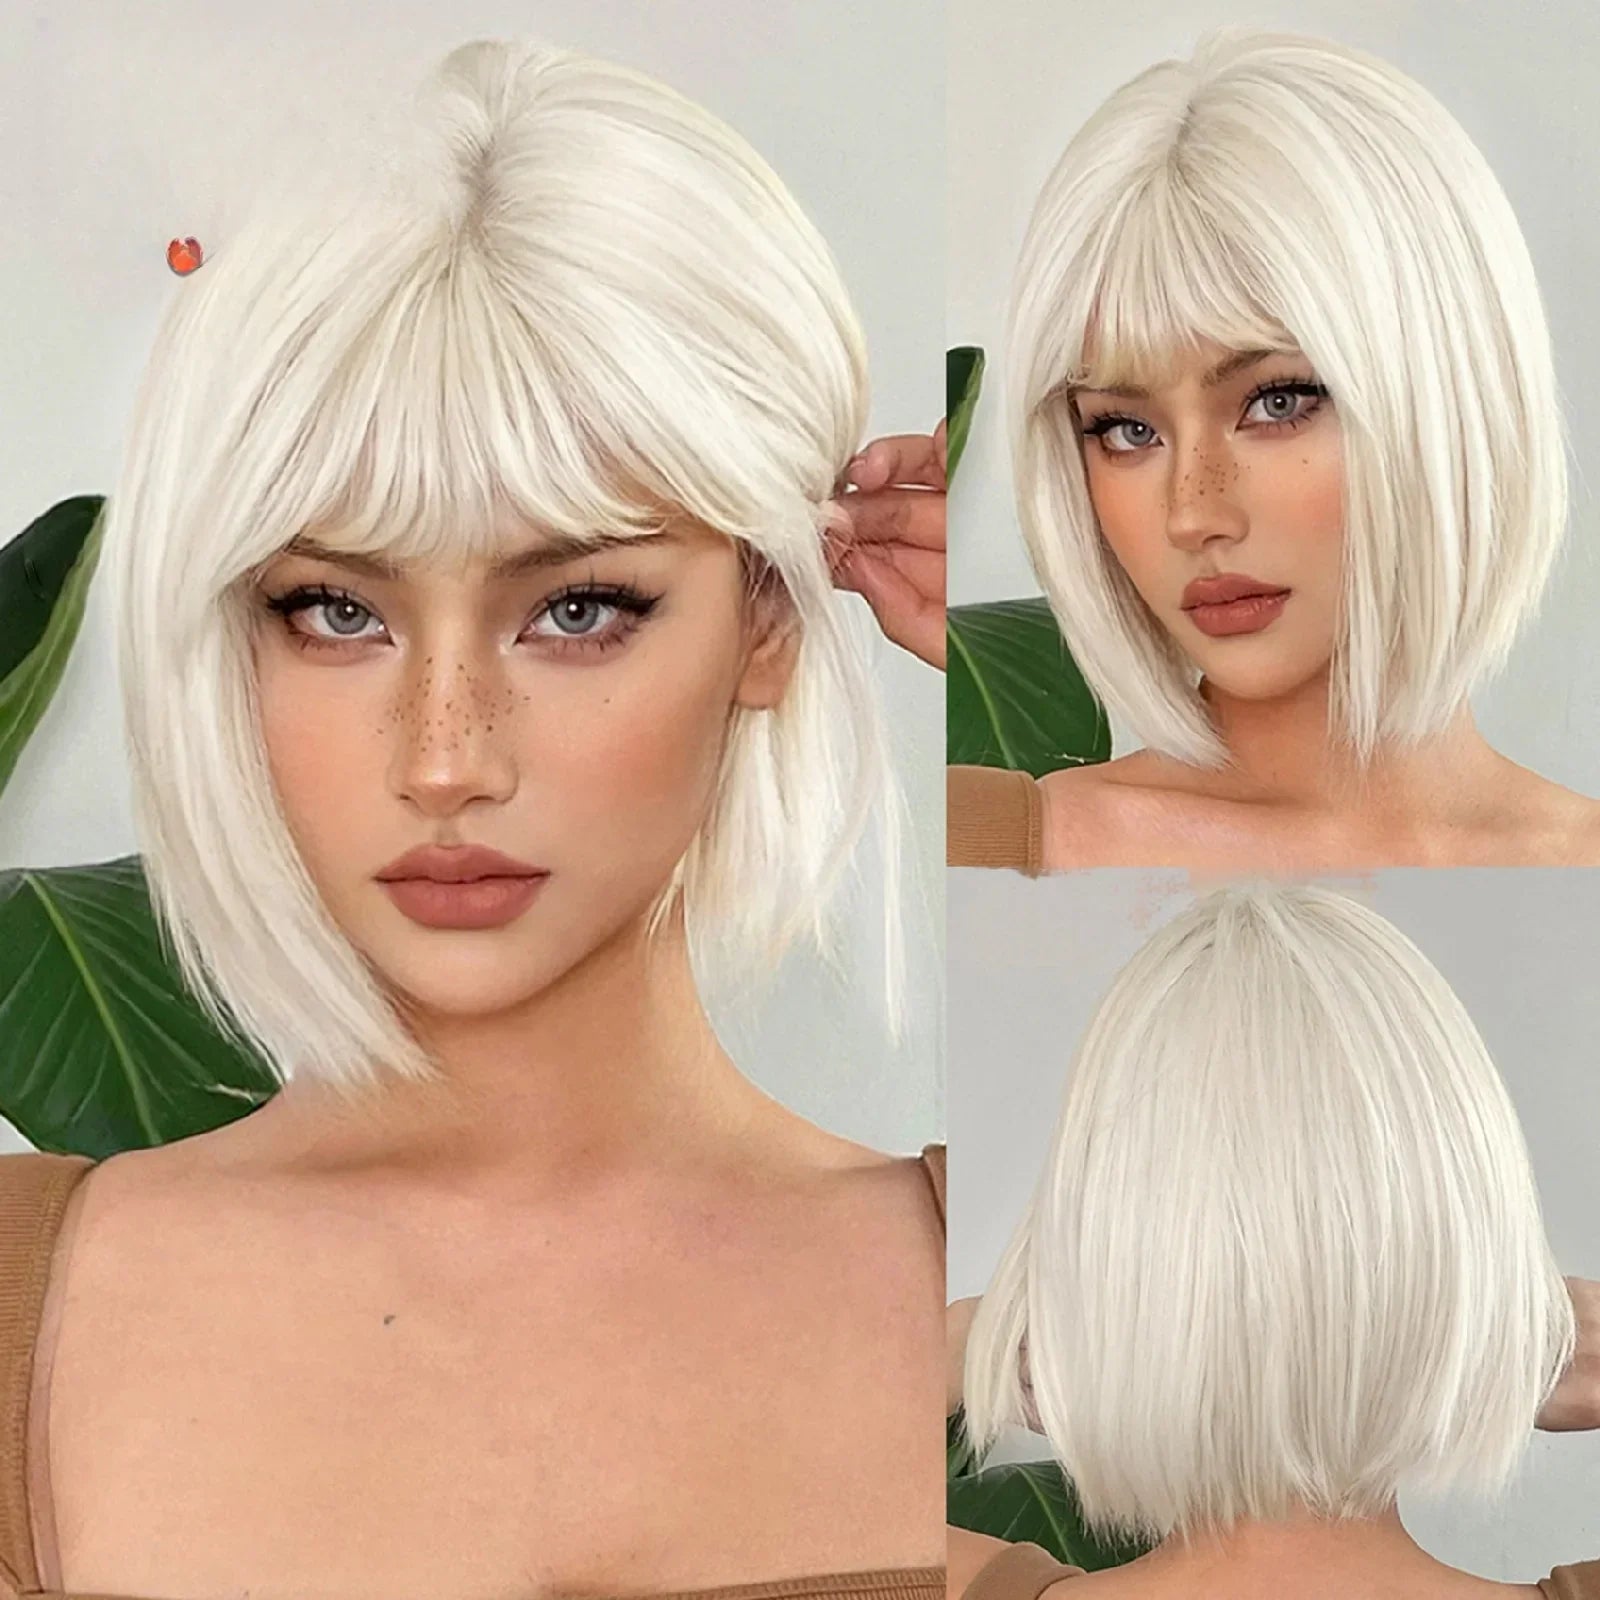 Short Bob Lace Front Wig with Bangs - Anellace